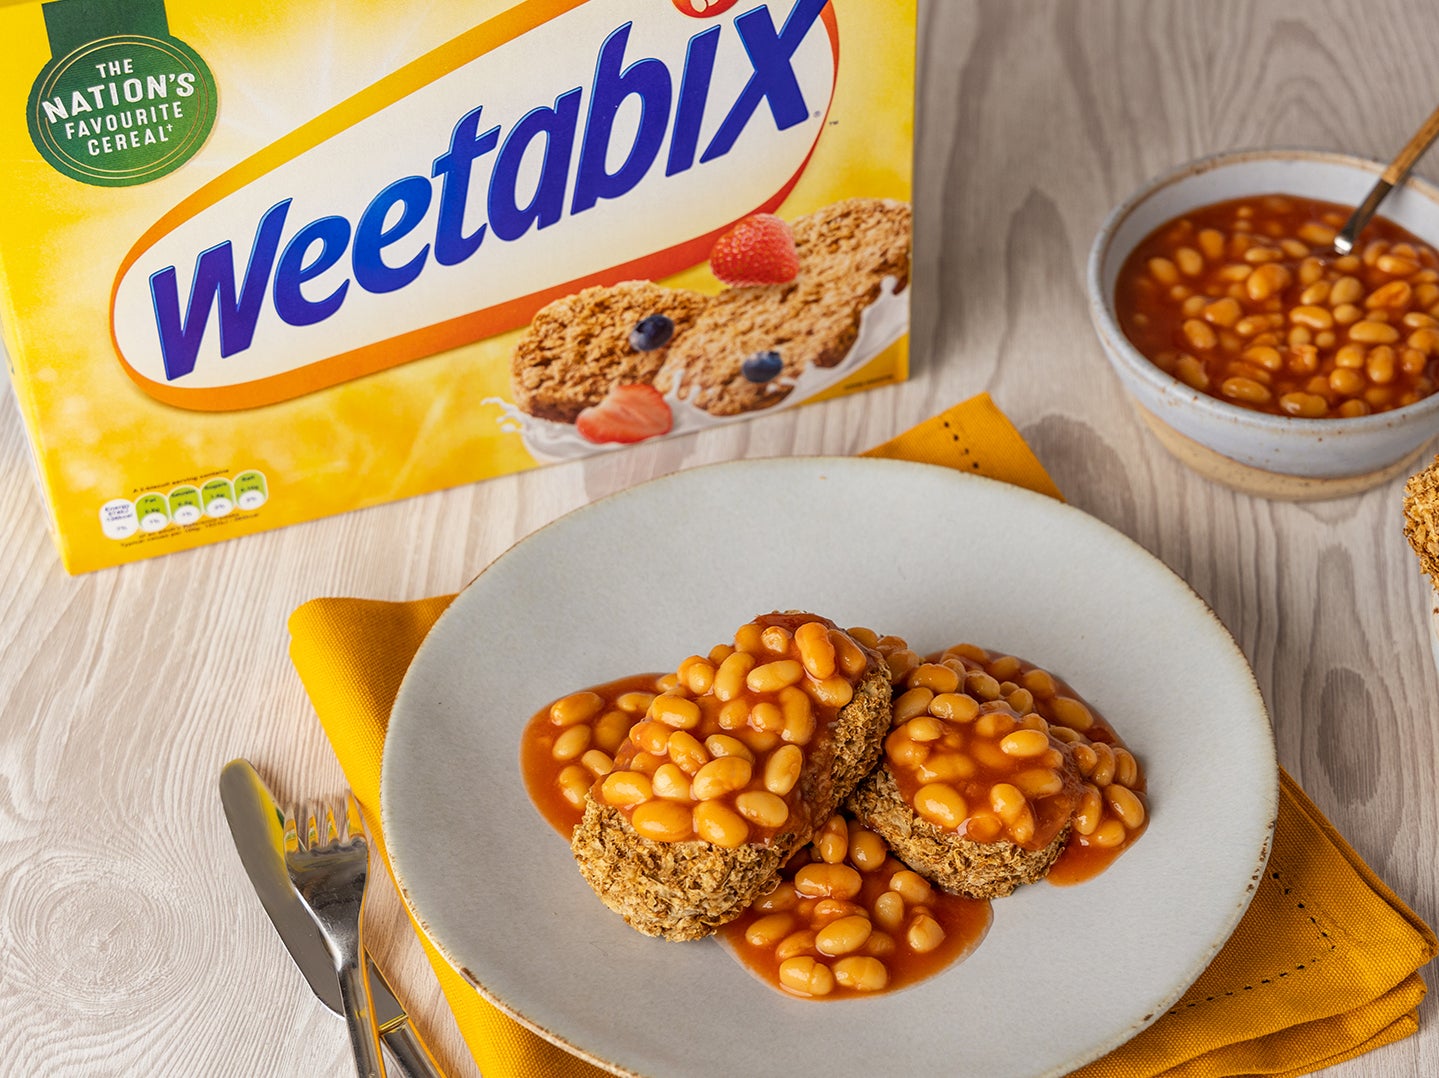 Weetabix criticised for suggesting fans serve cereal with baked